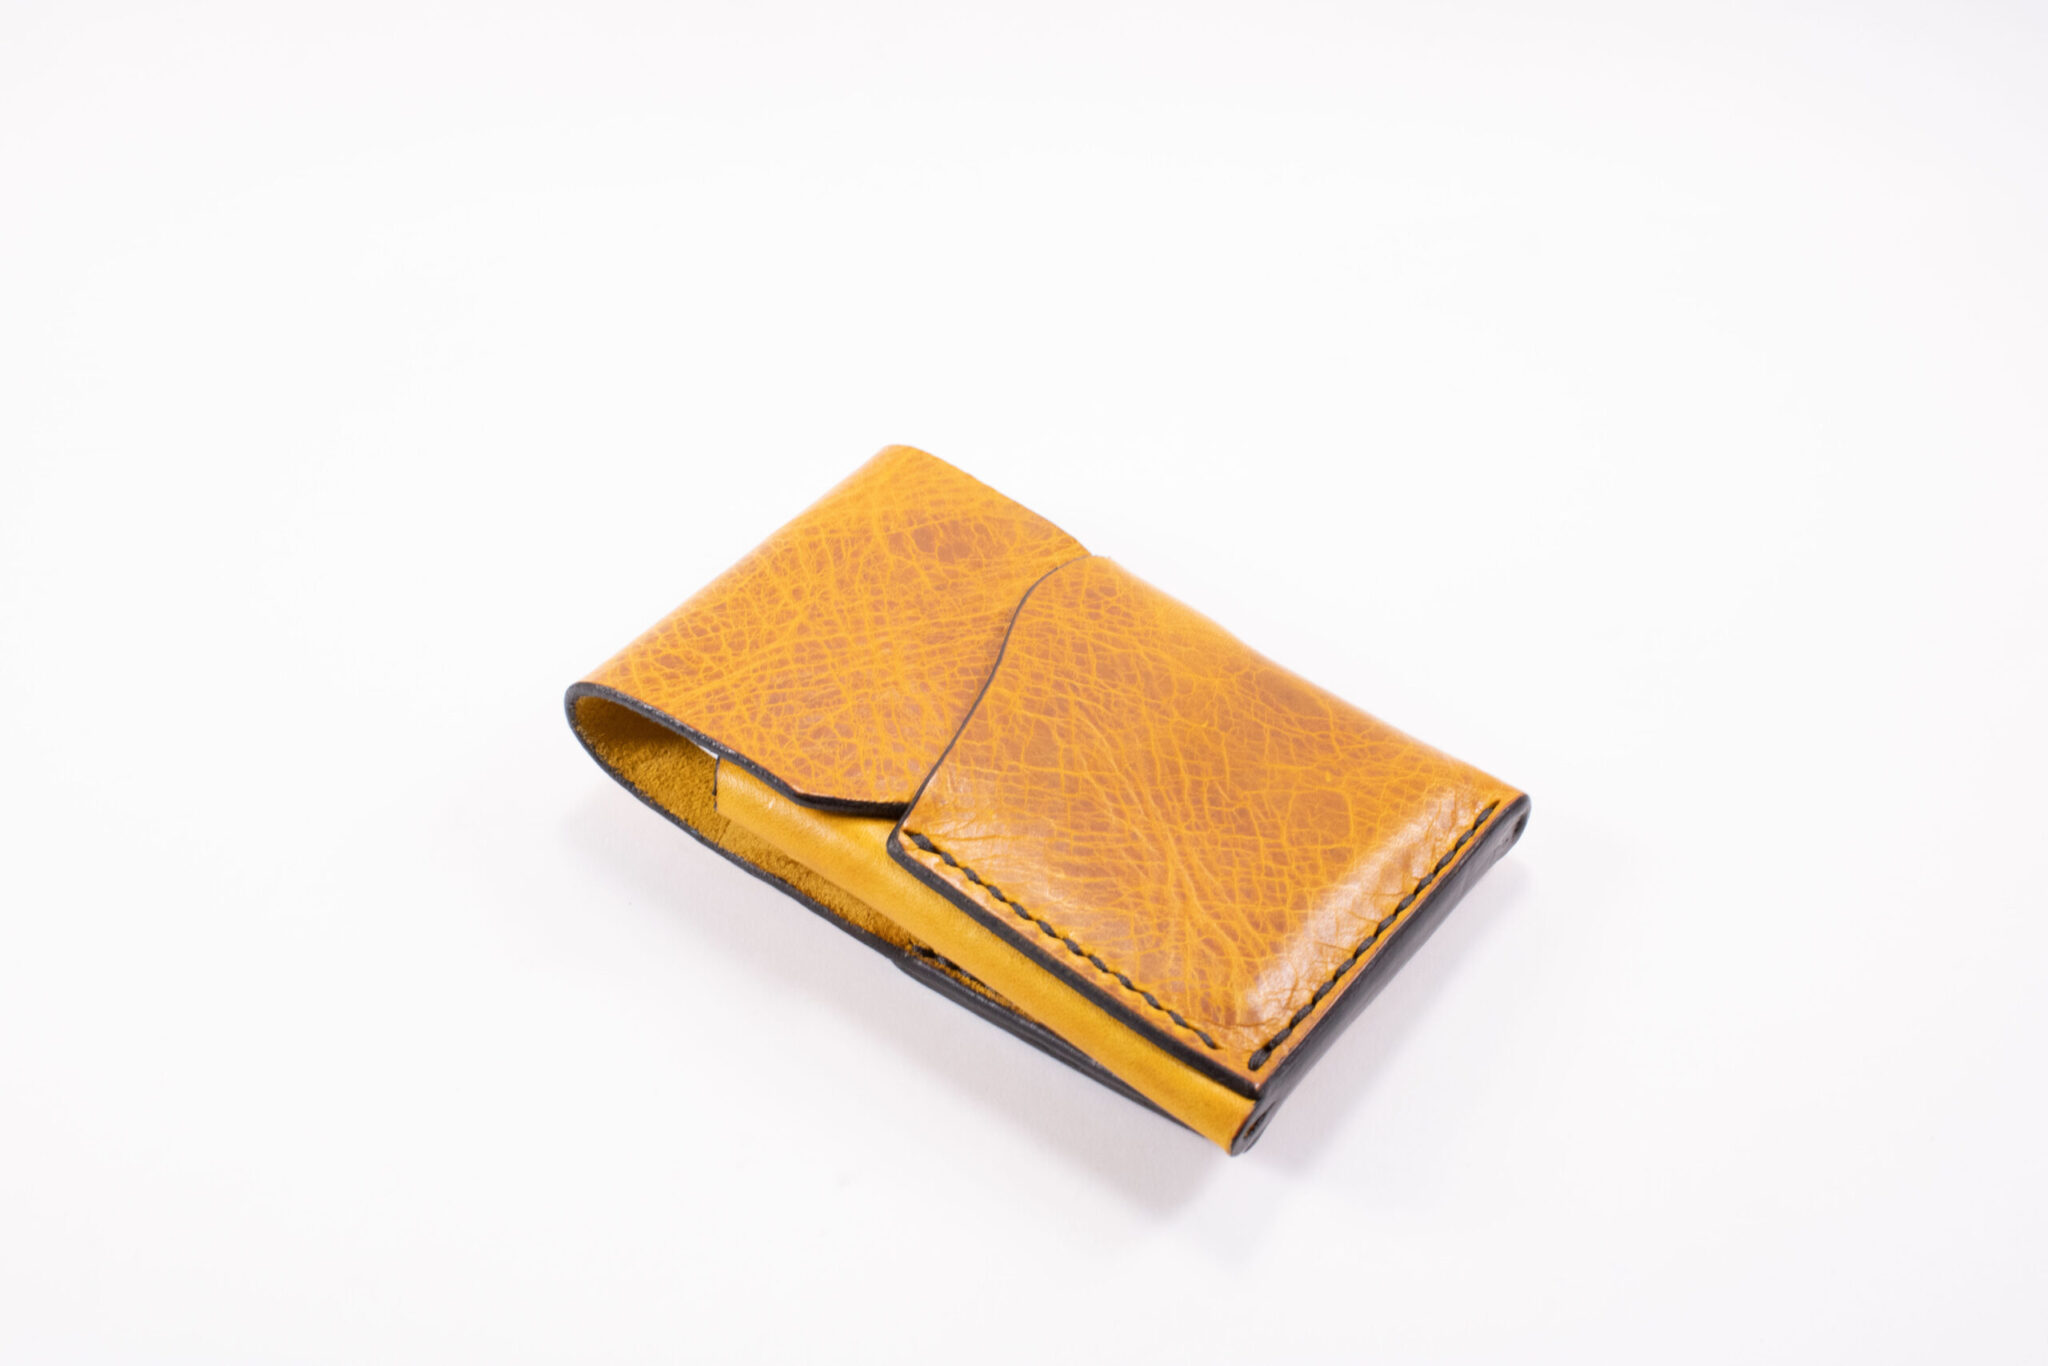 Product image of FredFloris leather credit card wallet